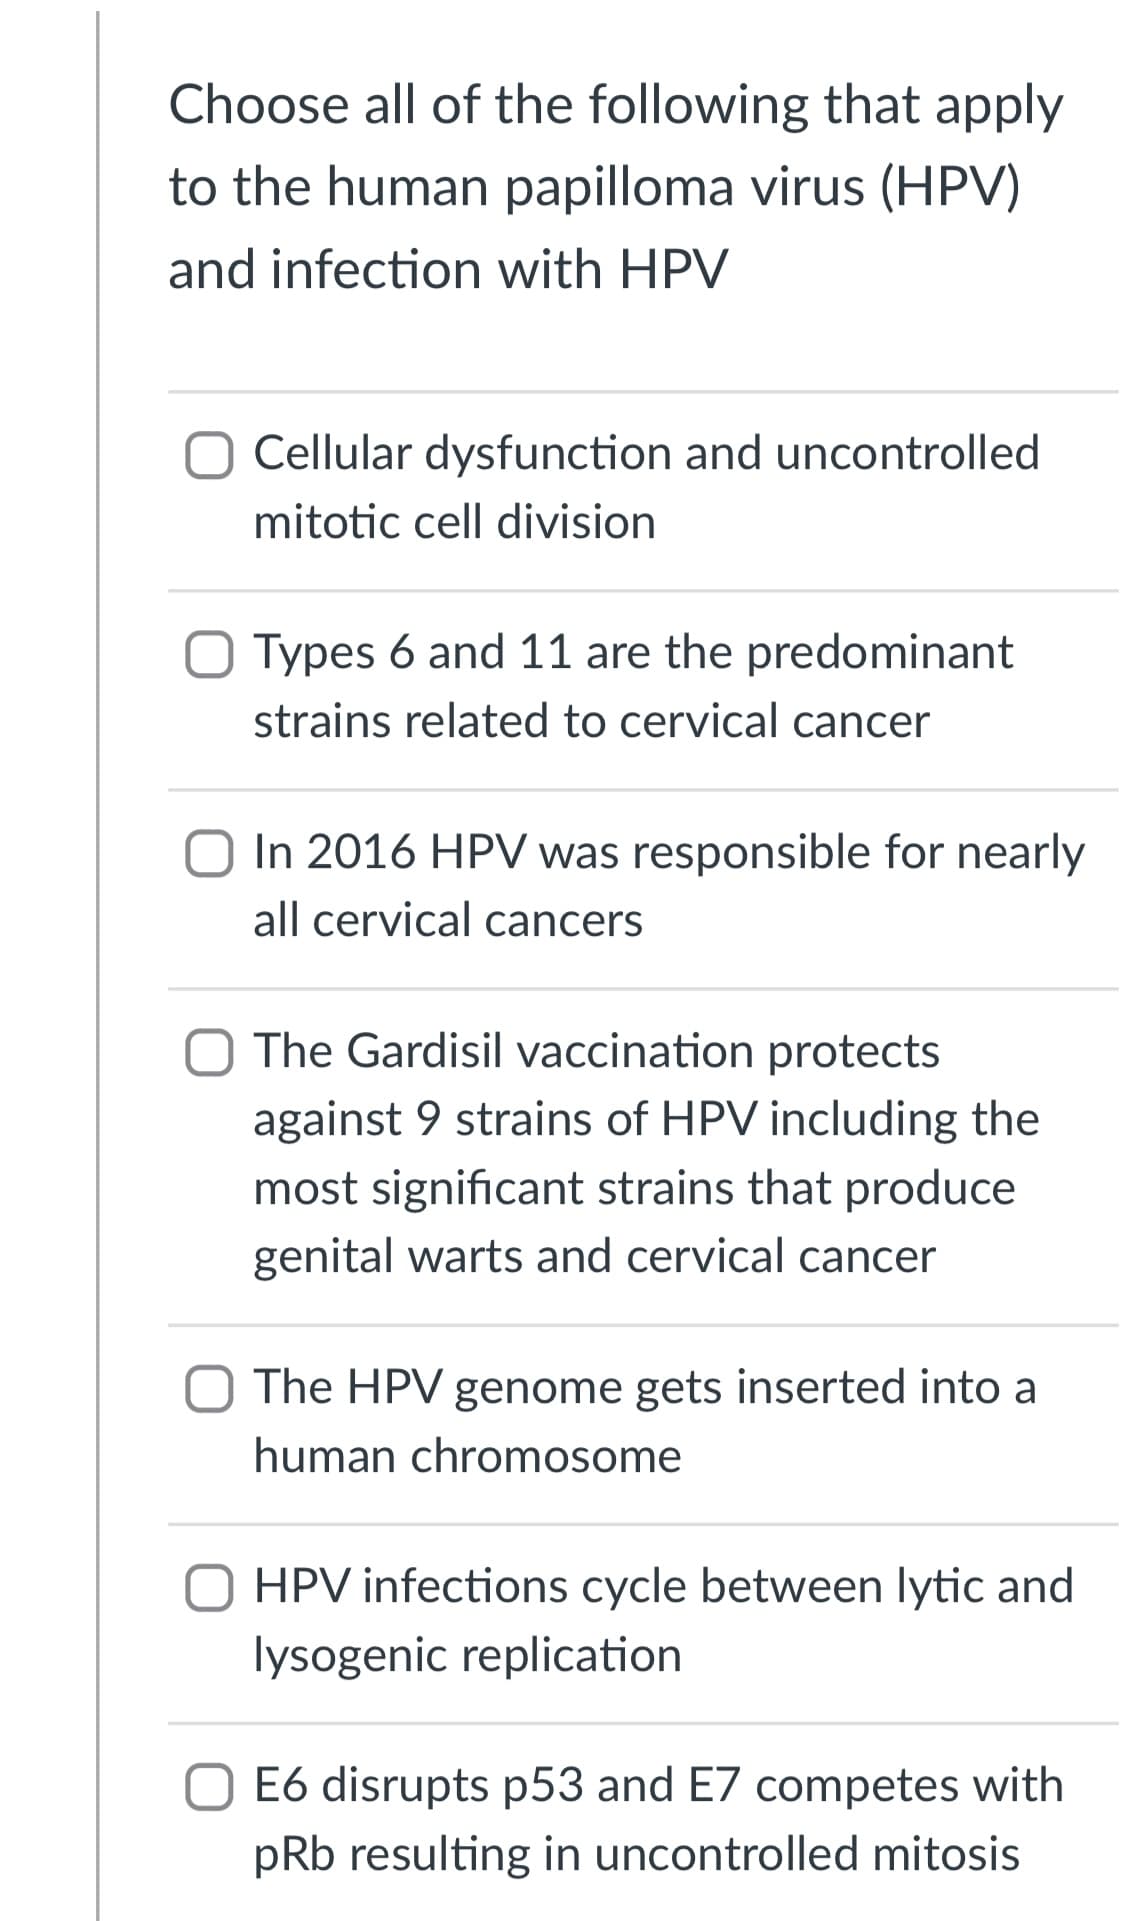 Choose all of the following that apply
to the human papilloma virus (HPV)
and infection with HPV
Cellular dysfunction and uncontrolled
mitotic cell division
Types 6 and 11 are the predominant
strains related to cervical cancer
In 2016 HPV was responsible for nearly
all cervical cancers
O The Gardisil vaccination protects
against 9 strains of HPV including the
most significant strains that produce
genital warts and cervical cancer
The HPV genome gets inserted into a
human chromosome
HPV infections cycle between lytic and
lysogenic replication
E6 disrupts p53 and E7 competes with
pRb resulting in uncontrolled mitosis
